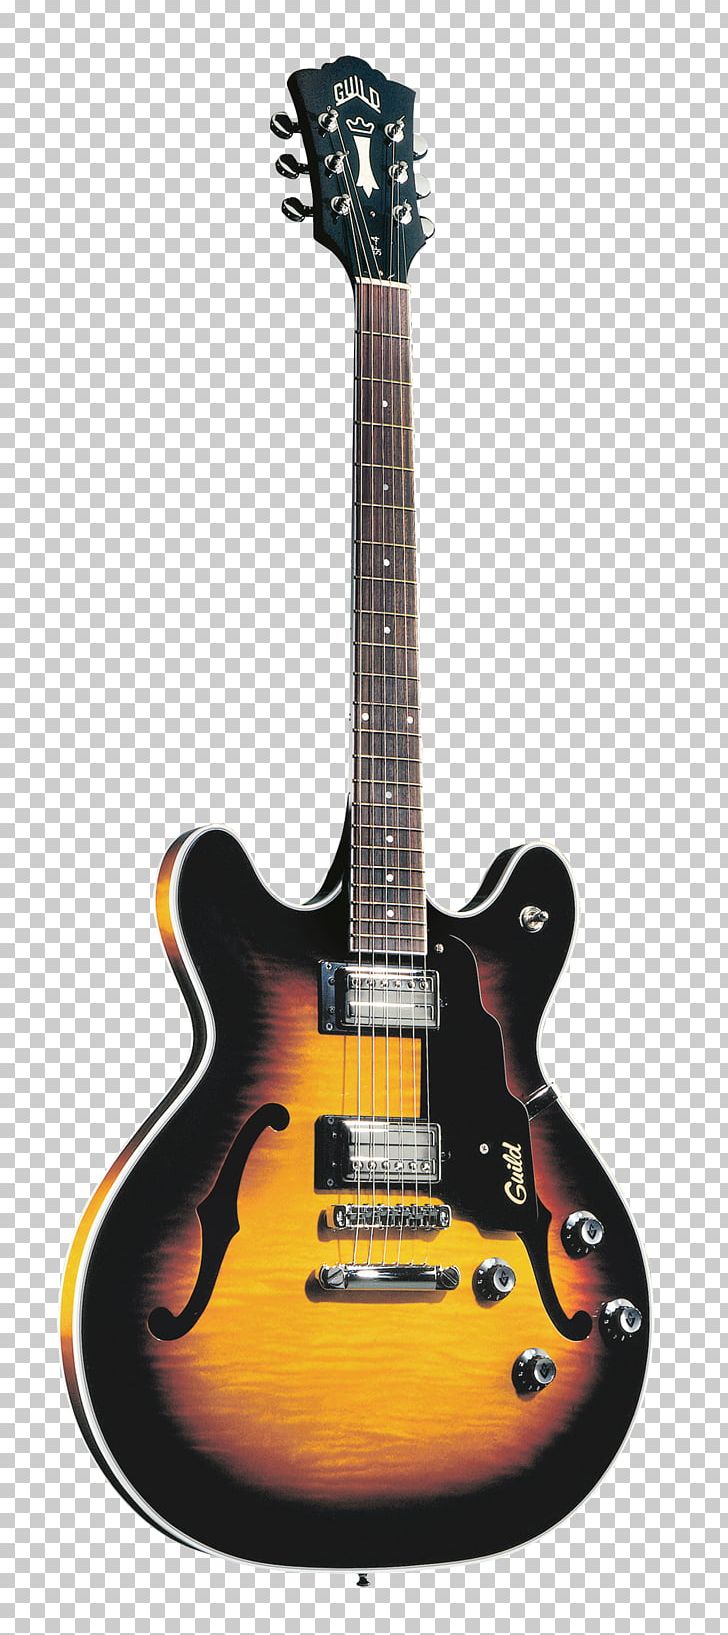 Acoustic Guitar Acoustic-electric Guitar Takamine Guitars Cutaway PNG, Clipart, Acoustic Electric Guitar, Archtop Guitar, Cutaway, Guitar Accessory, Musical Instruments Free PNG Download